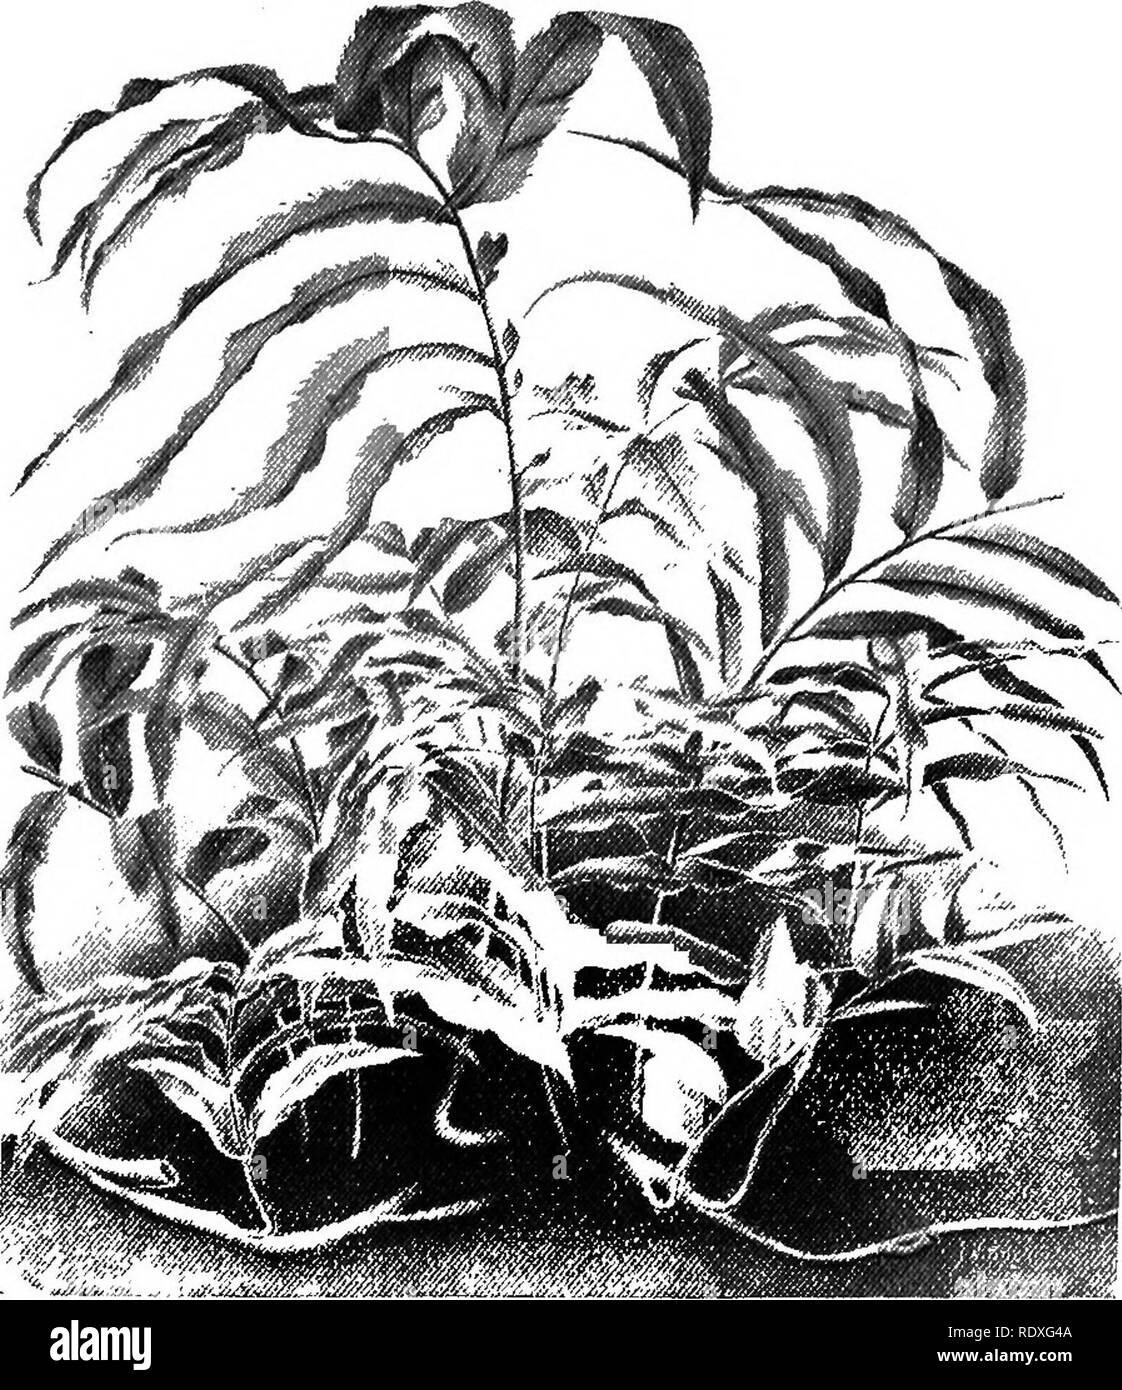 . The Book of gardening; a handbook of horticulture. Gardening; Horticulture. ON FERNS. 537 Soil.—The soil used for planting the exotic fernery should be of a specially rough and open nature, and a mixture of fibrous loam, leaf-mould, and sand in equal proportions will be found to suit the majority of Ferns, whether for the greenhouse or for the warm fernery. Where, however, Gymnogrammes, Gleichenias, Cheilanthes, Pellseas, Platyceriums, Nothochlsenas, and a few- other kinds are to be planted, it will be best to add one part of peat to the above-named compost. Plants belonging to such. Fig. 33 Stock Photo